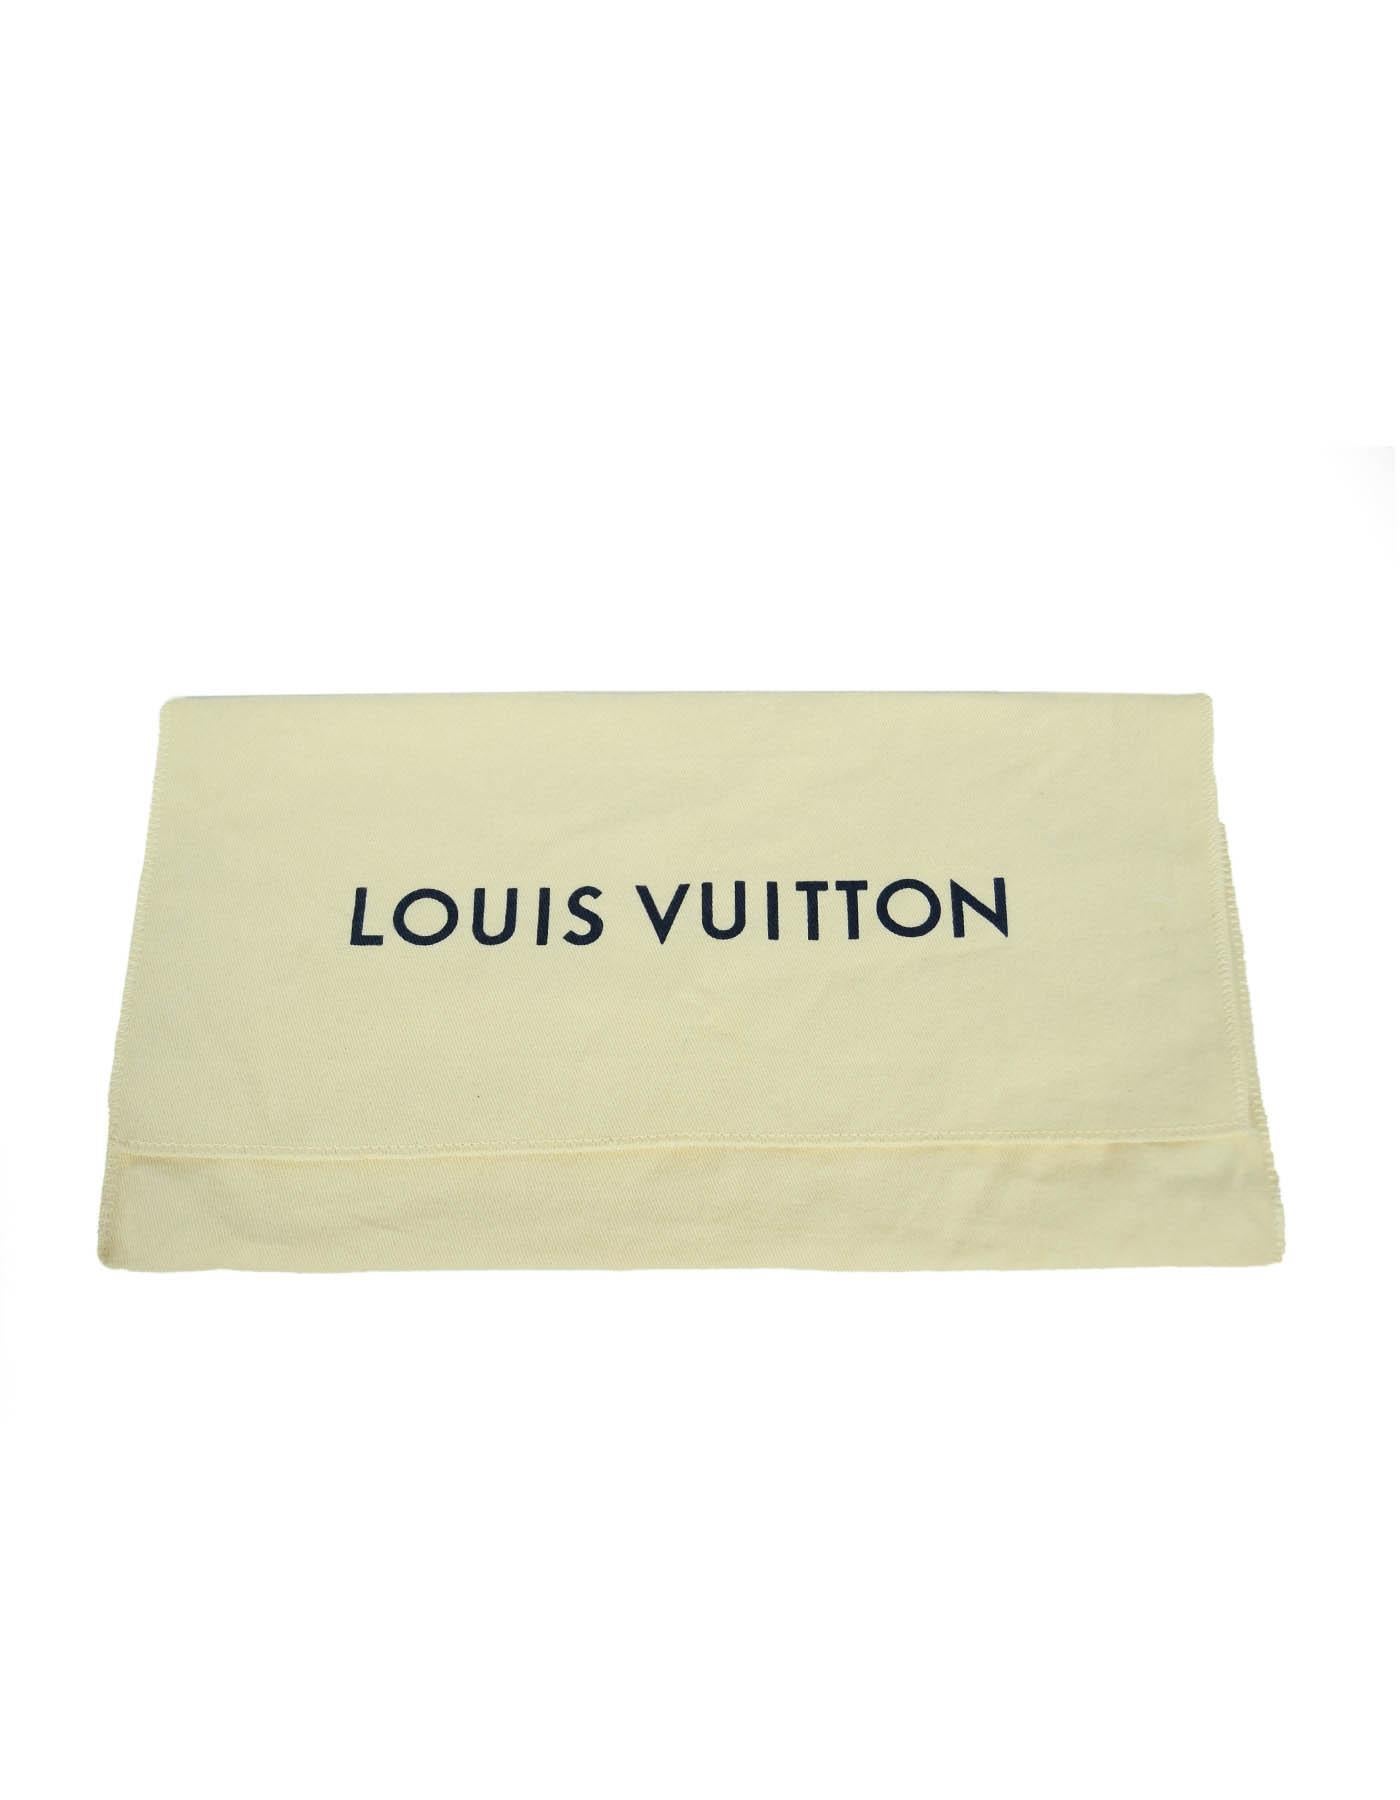 Louis Vuitton SOLD OUT Monogram Coated Canvas Toiletry Pouch 19 Cosmetic Bag 3